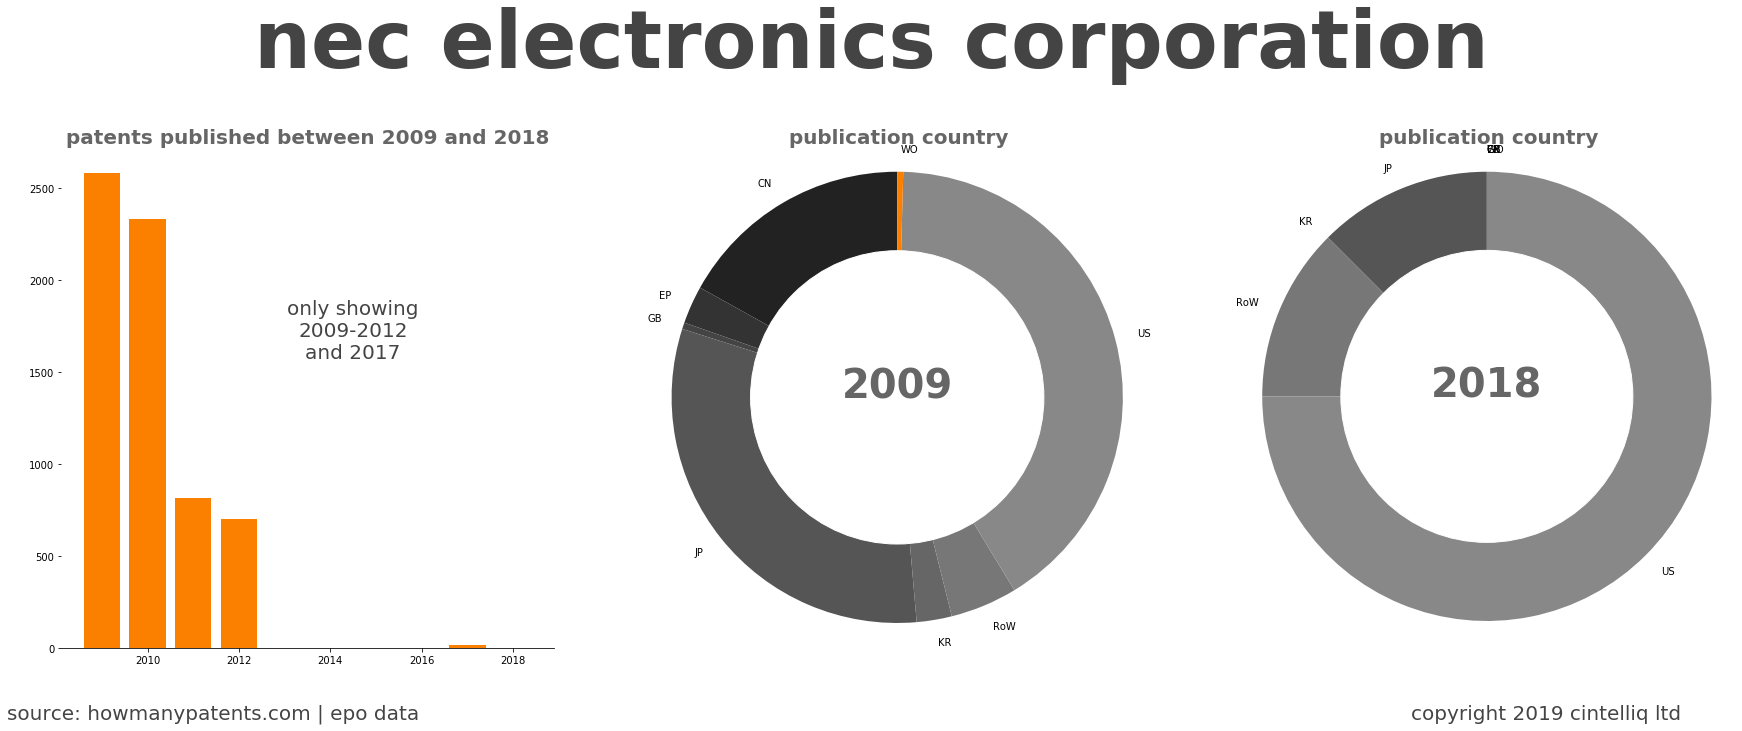 summary of patents for Nec Electronics Corporation